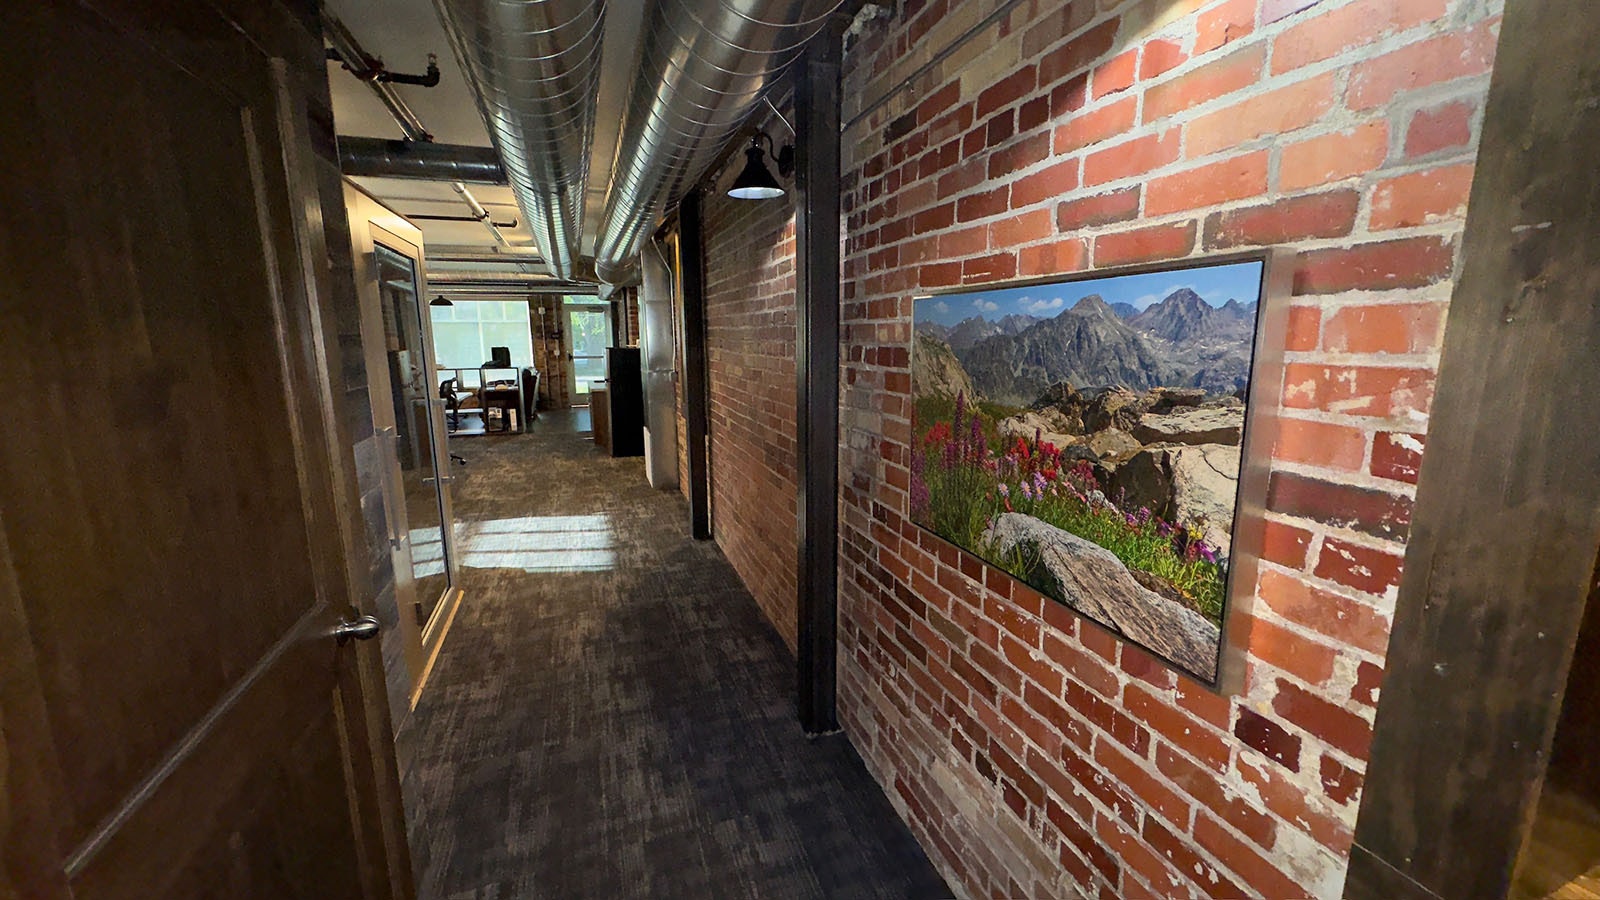 The exposed brick maintains the historic nature of the Irwin Barn. This is a hallway between the main newsroom and the conference room. It's highlighted by a large original print from Wyoming photographer Dave Bell.